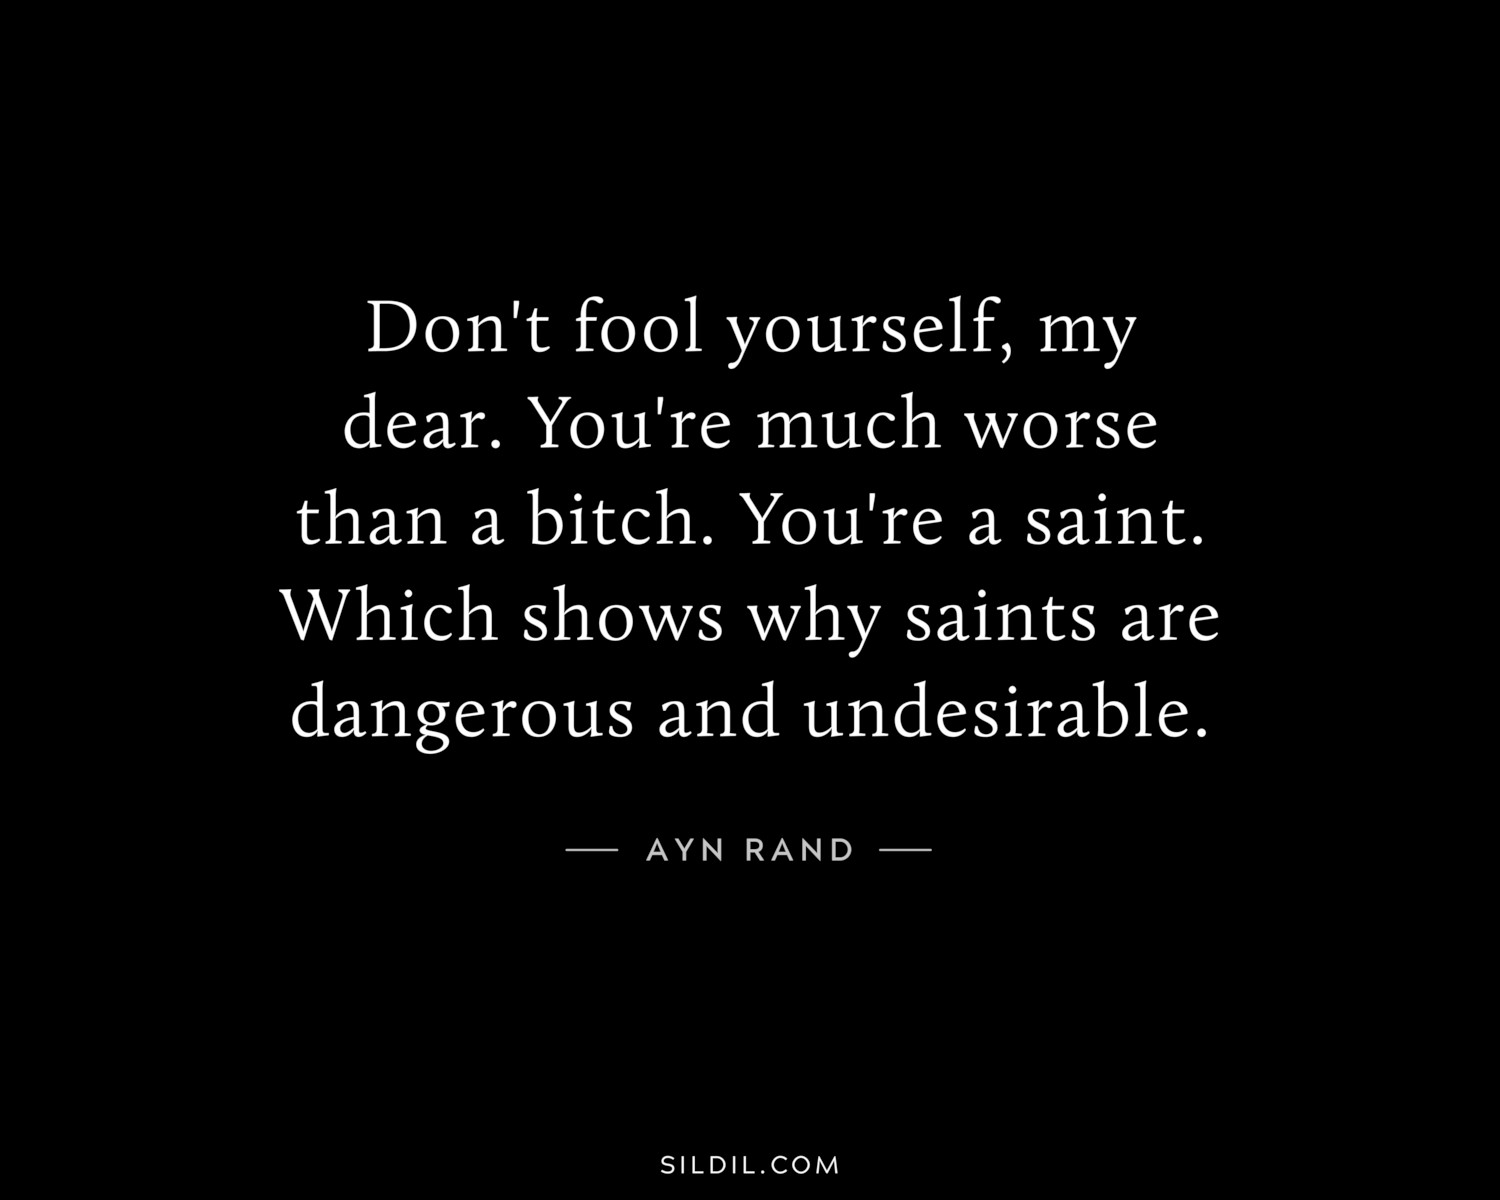 Don't fool yourself, my dear. You're much worse than a bitch. You're a saint. Which shows why saints are dangerous and undesirable.